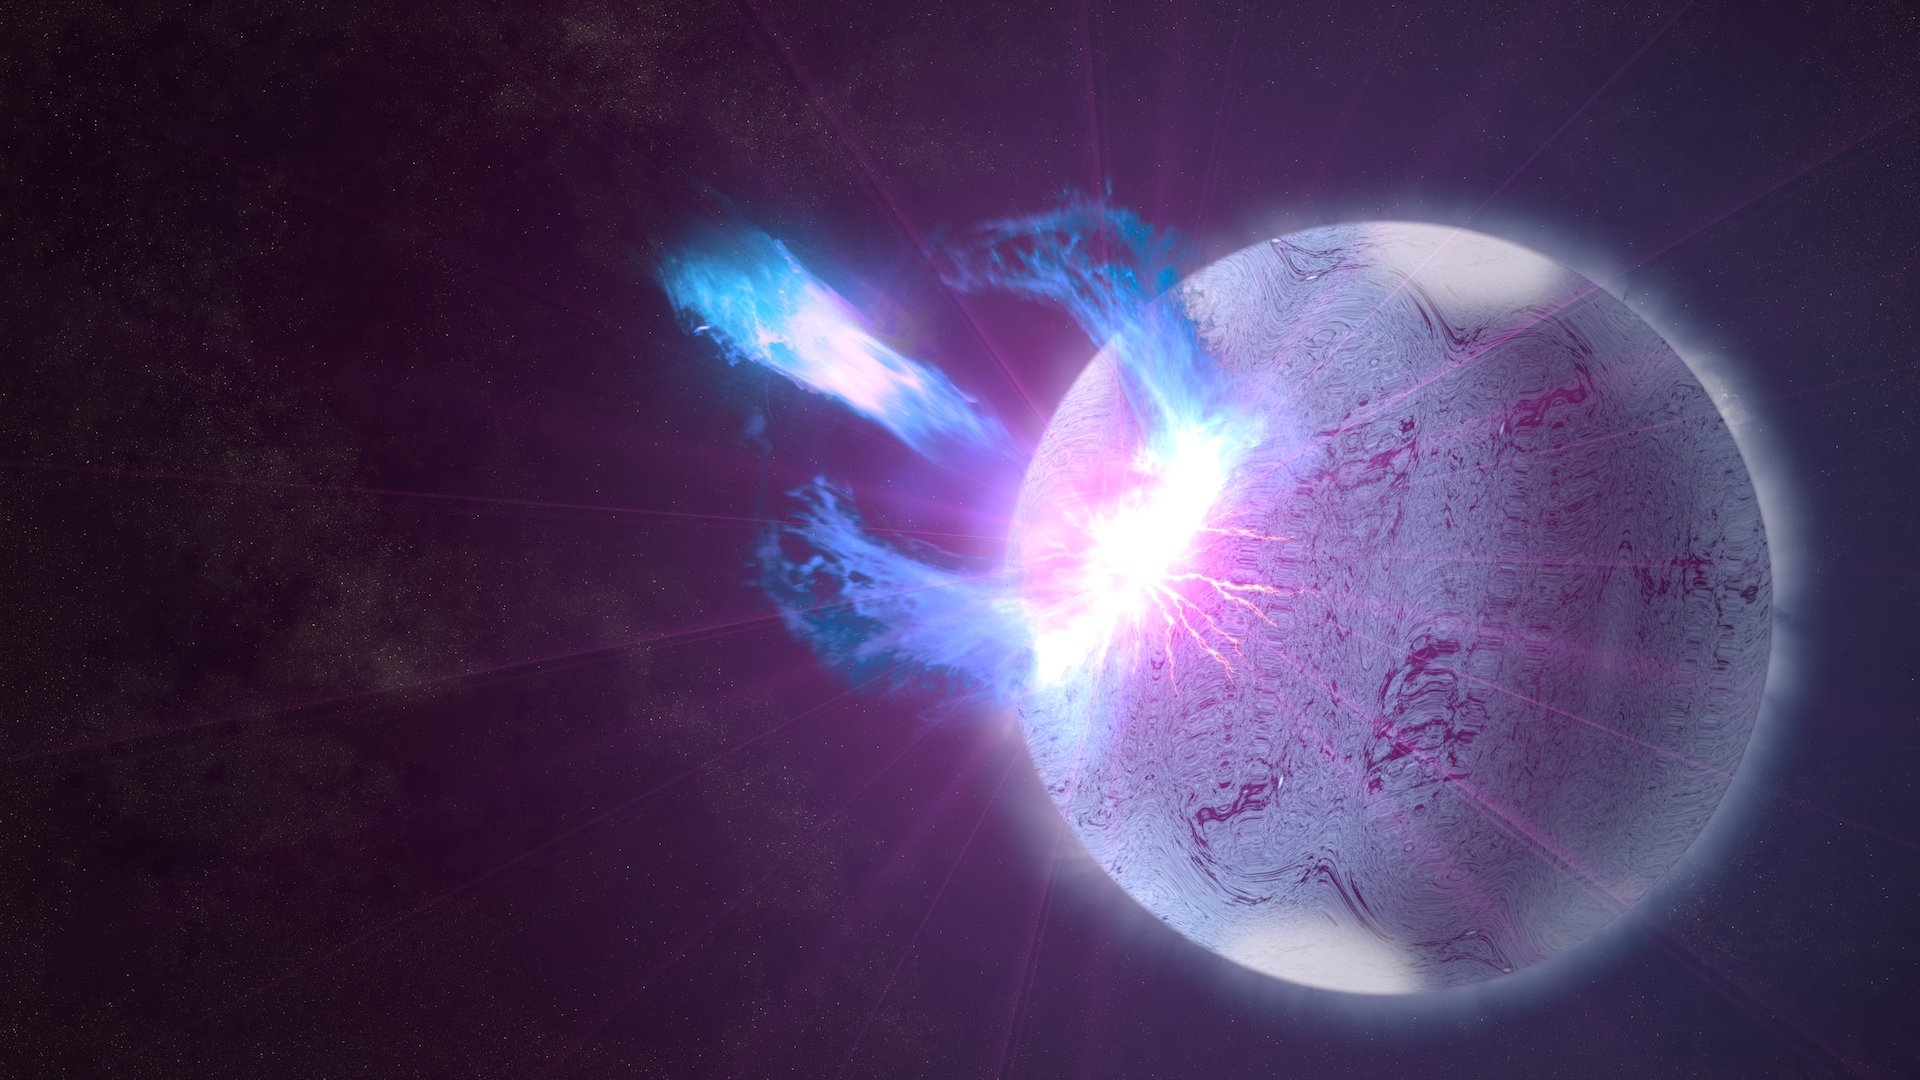 A rupture in the crust of a highly magnetized neutron star, shown here in an artist's rendering, can trigger high-energy eruptions. Fermi observations of these blasts include information on how the star's surface twists and vibrates, providing new insights into what lies beneath. The subtle pattern on the surface represents a twisting motion imparted to the magnetar by the explosion.Credit: NASA's Goddard Space Flight Center/S. Wiessinger